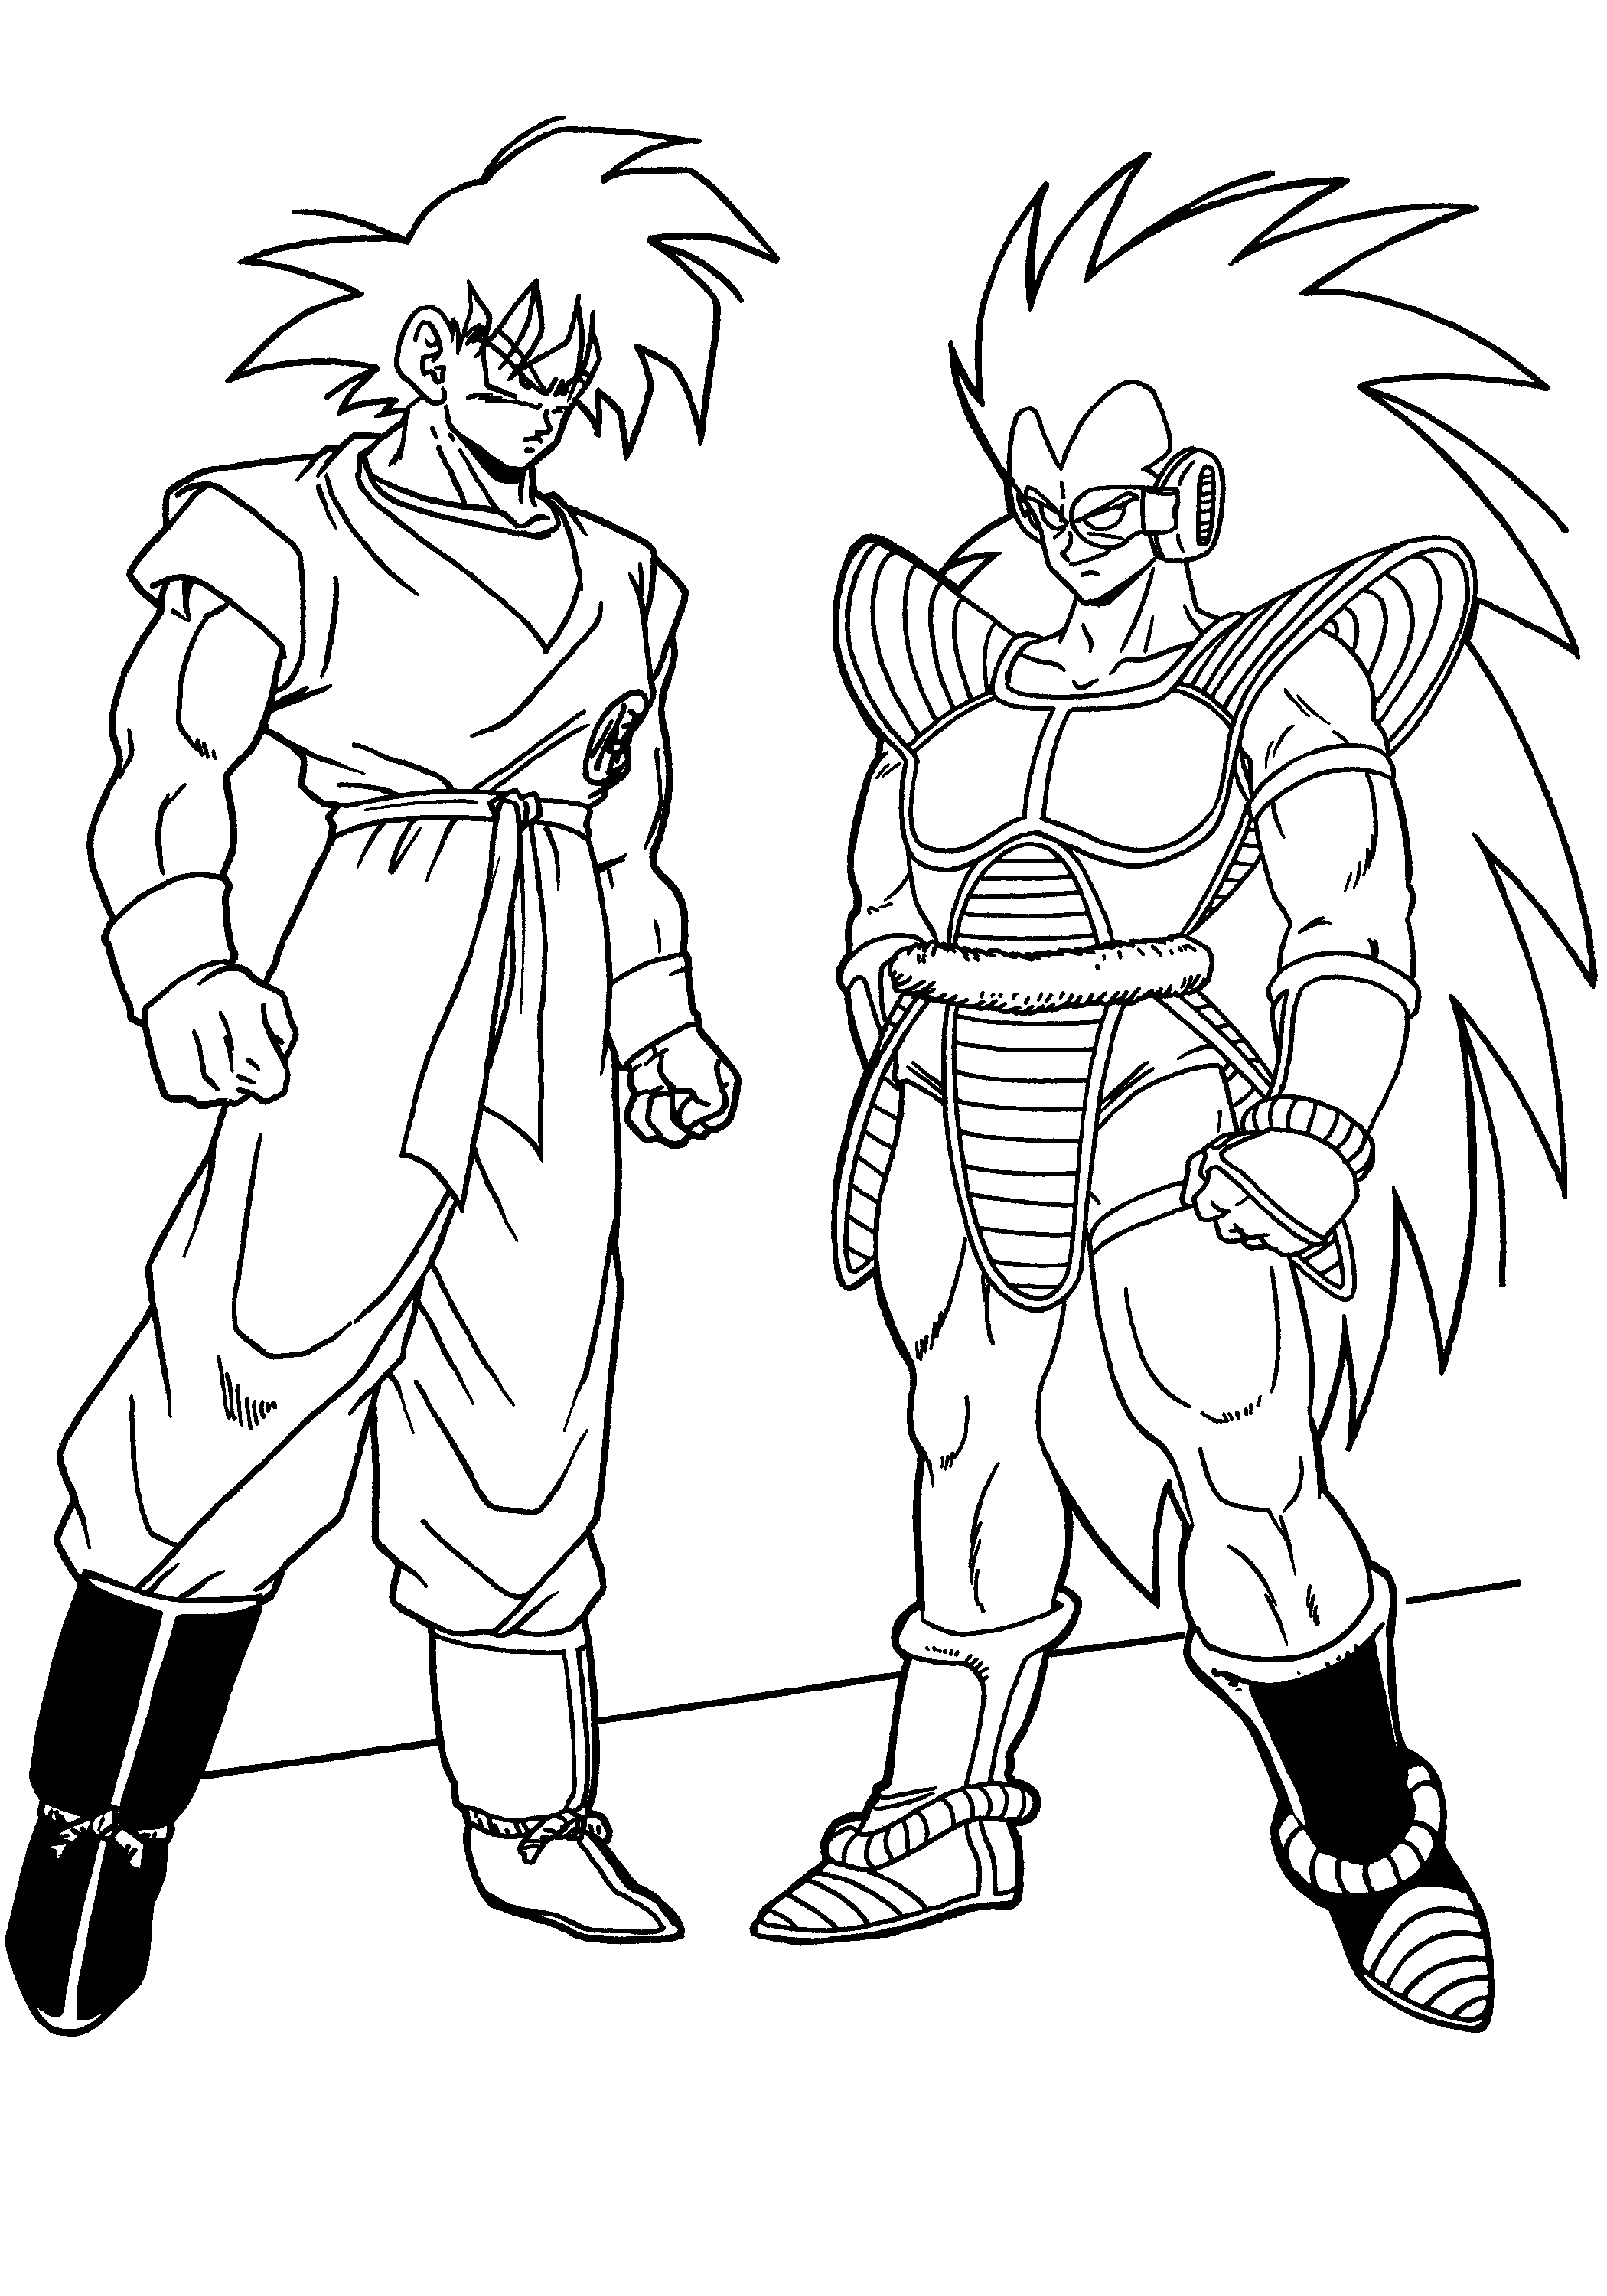 Goku and Gohan Coloring Pages - Free Printable Coloring Pages